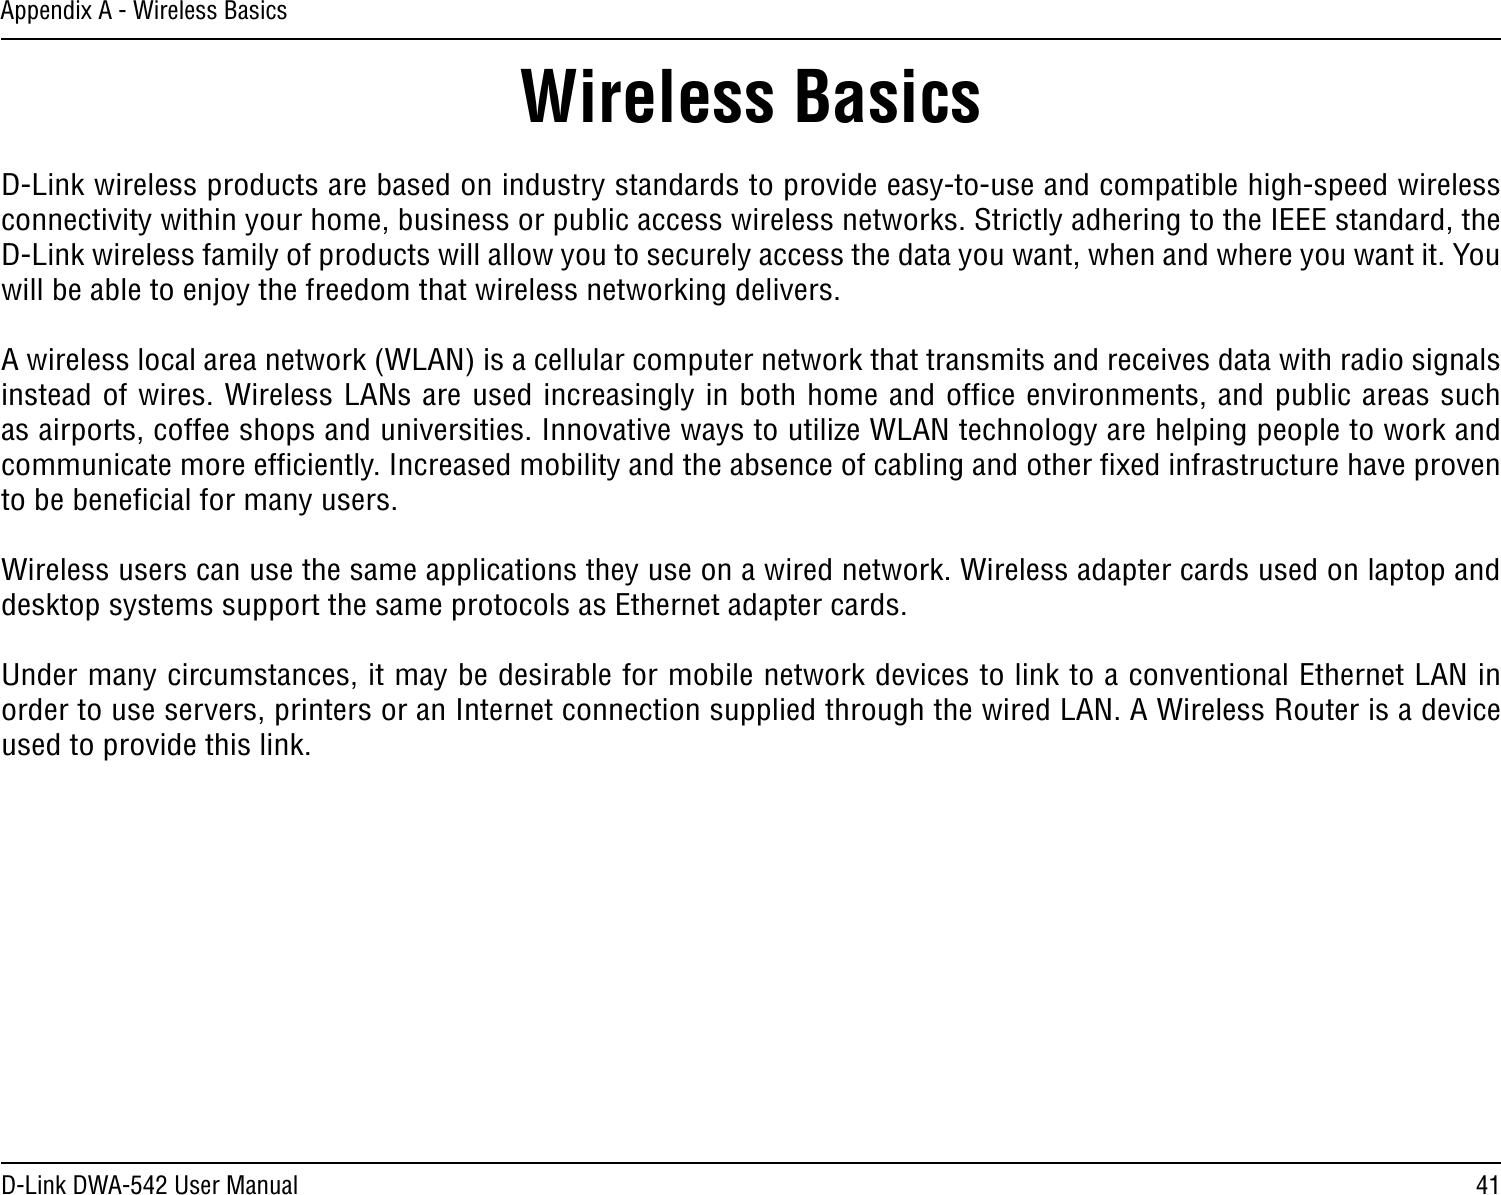 41D-Link DWA-542 User ManualAppendix A - Wireless BasicsD-Link wireless products are based on industry standards to provide easy-to-use and compatible high-speed wireless connectivity within your home, business or public access wireless networks. Strictly adhering to the IEEE standard, the D-Link wireless family of products will allow you to securely access the data you want, when and where you want it. You will be able to enjoy the freedom that wireless networking delivers.A wireless local area network (WLAN) is a cellular computer network that transmits and receives data with radio signals instead of wires. Wireless LANs are used increasingly in both home and ofﬁce environments, and public areas such as airports, coffee shops and universities. Innovative ways to utilize WLAN technology are helping people to work and communicate more efﬁciently. Increased mobility and the absence of cabling and other ﬁxed infrastructure have proven to be beneﬁcial for many users. Wireless users can use the same applications they use on a wired network. Wireless adapter cards used on laptop and desktop systems support the same protocols as Ethernet adapter cards. Under many circumstances, it may be desirable for mobile network devices to link to a conventional Ethernet LAN in order to use servers, printers or an Internet connection supplied through the wired LAN. A Wireless Router is a device used to provide this link.Wireless Basics